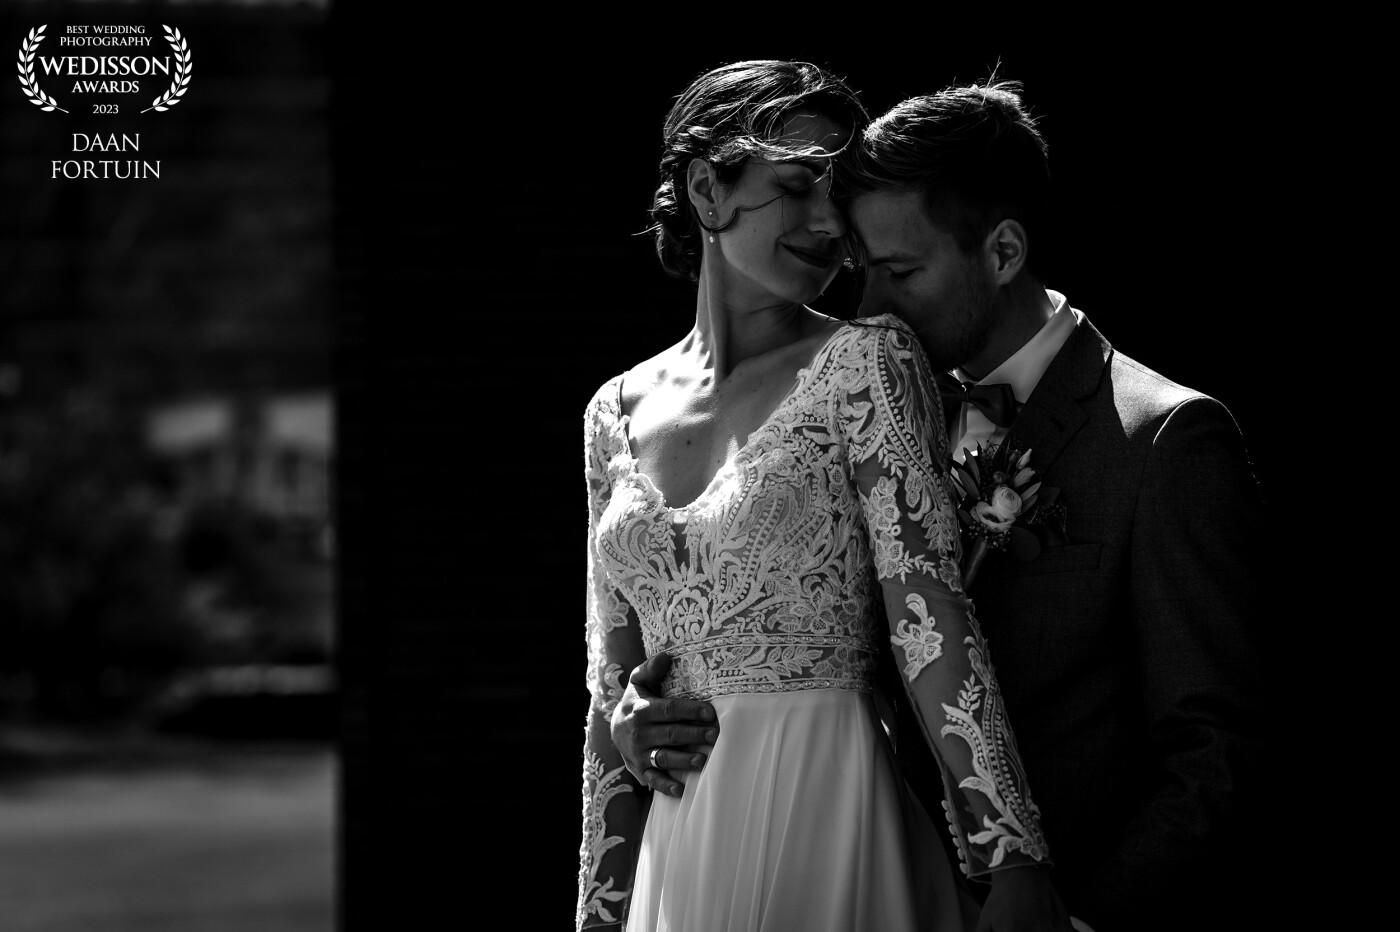 I love contrast and playing with light.. this beautiful couple made it all come together ;)